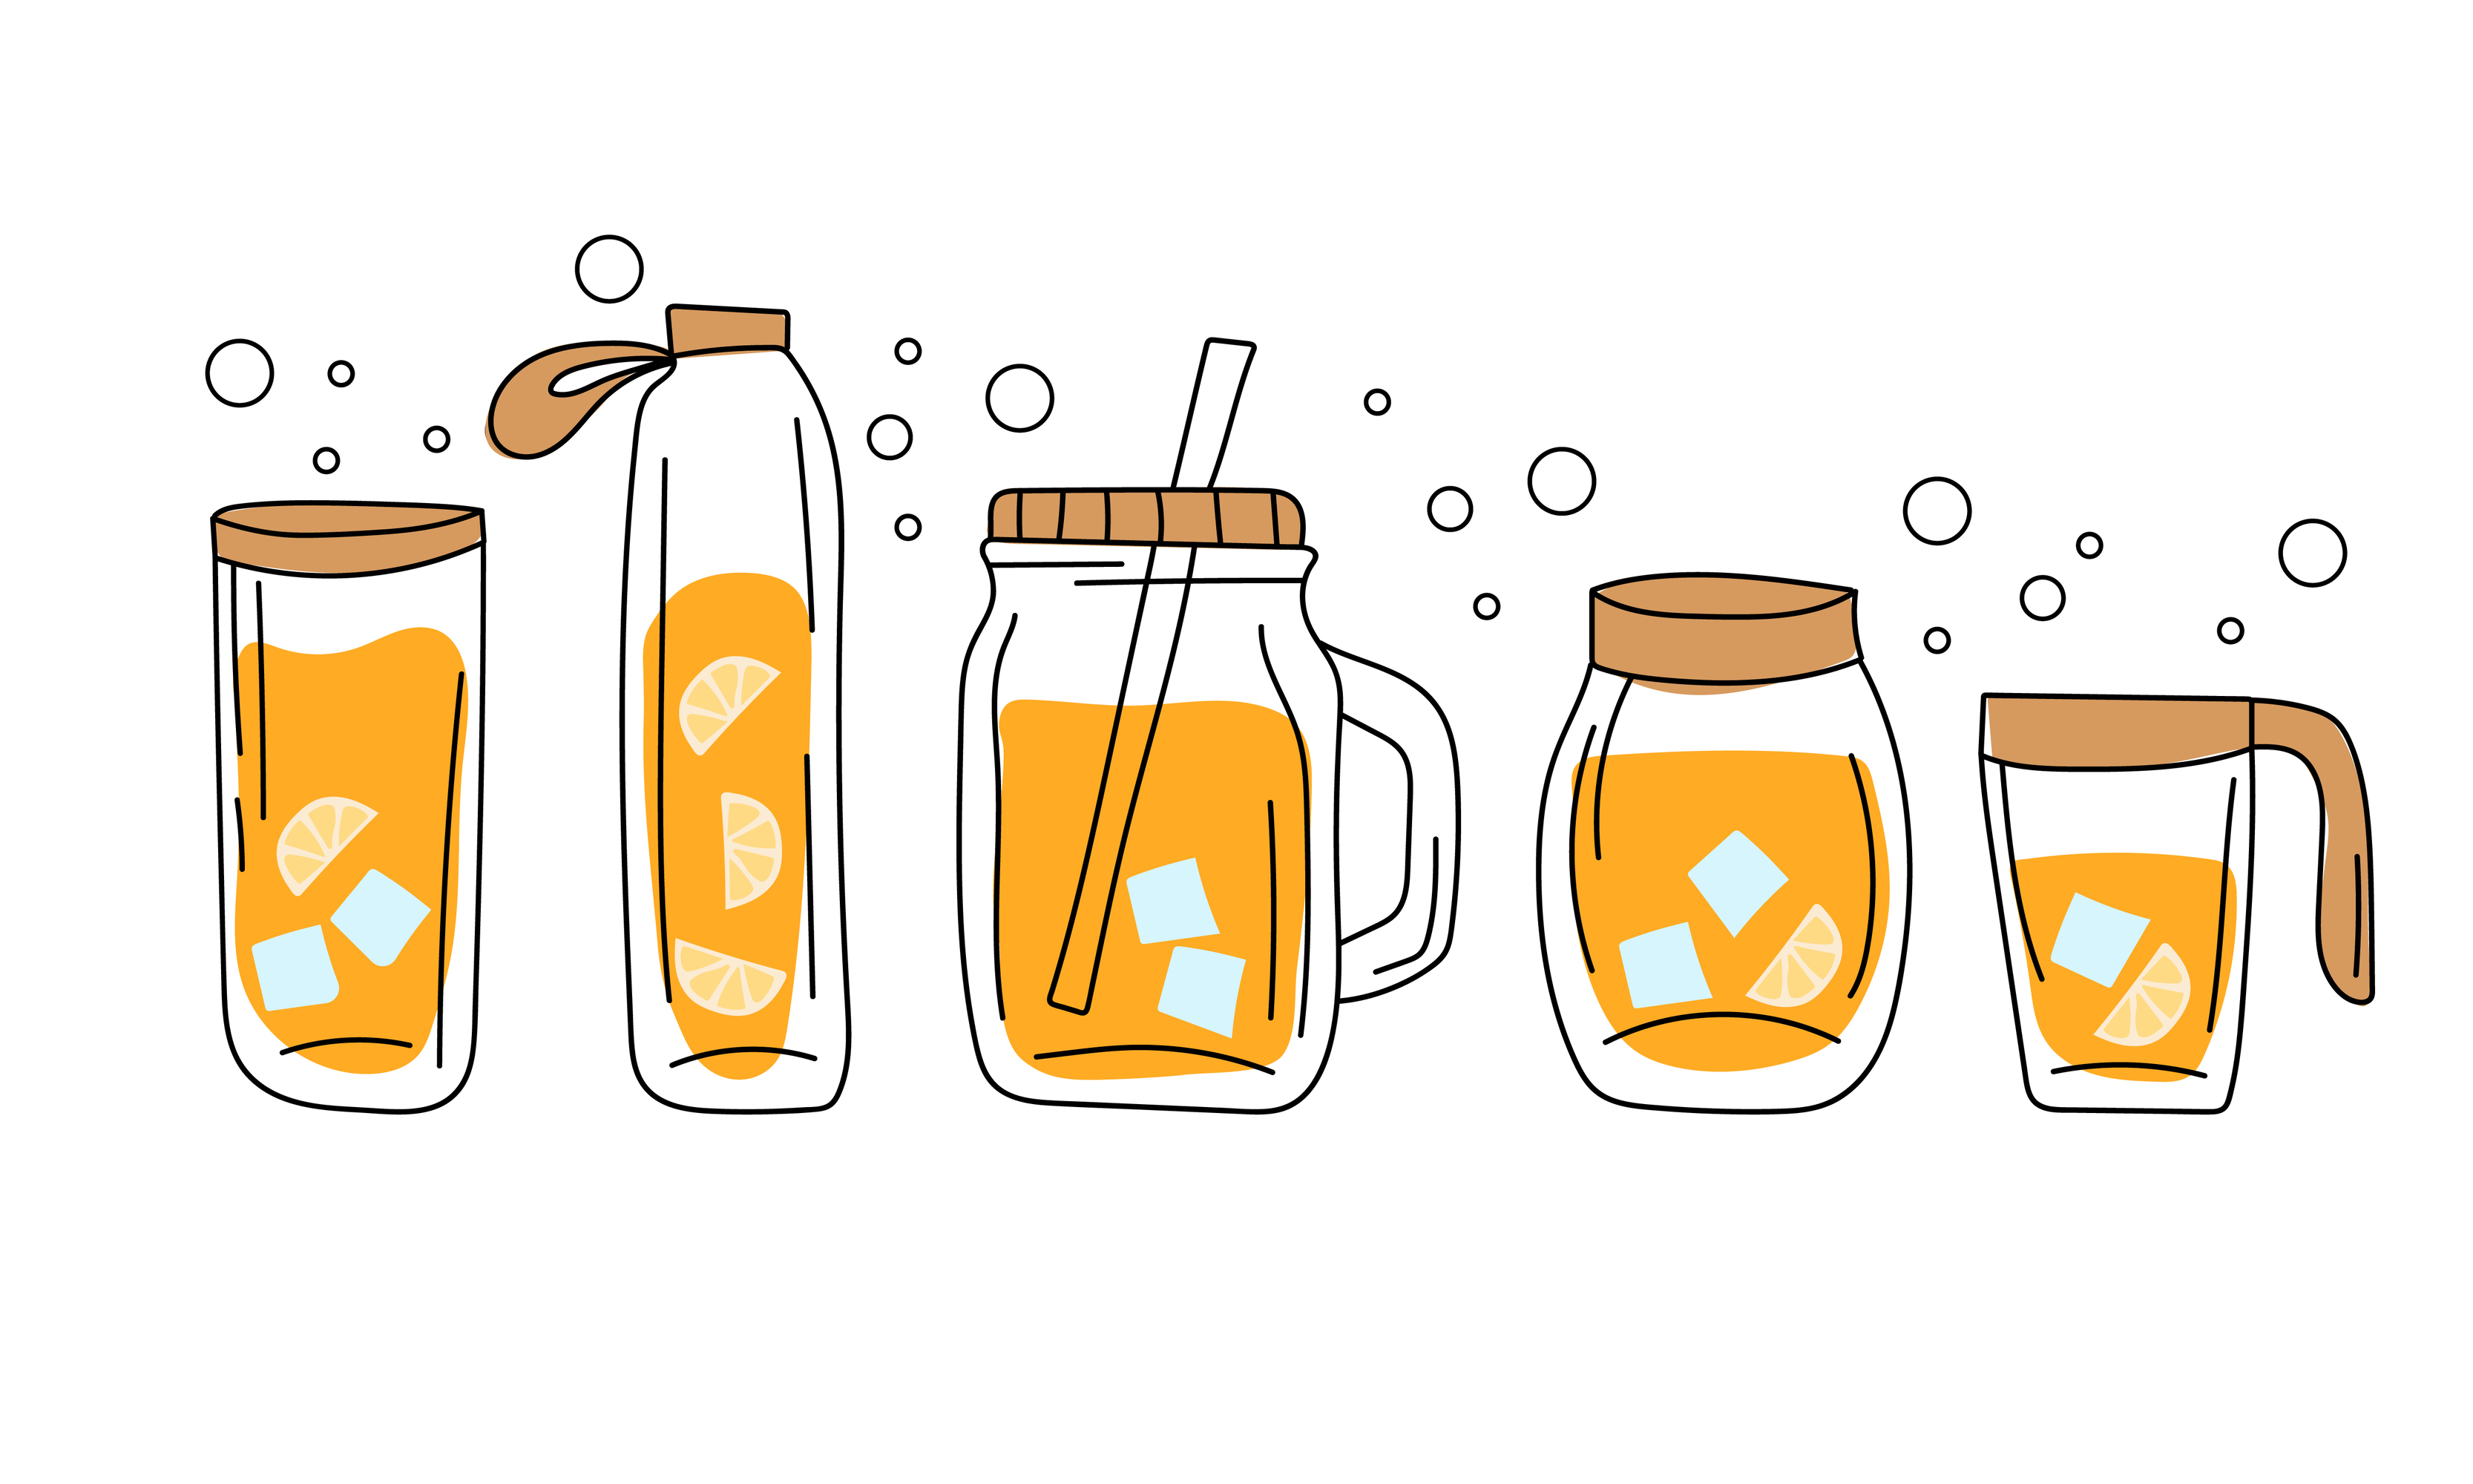 https://static.vecteezy.com/system/resources/previews/004/532/216/original/set-of-glass-containers-and-bottles-with-orange-juice-with-ice-hand-drawn-style-vector.jpg